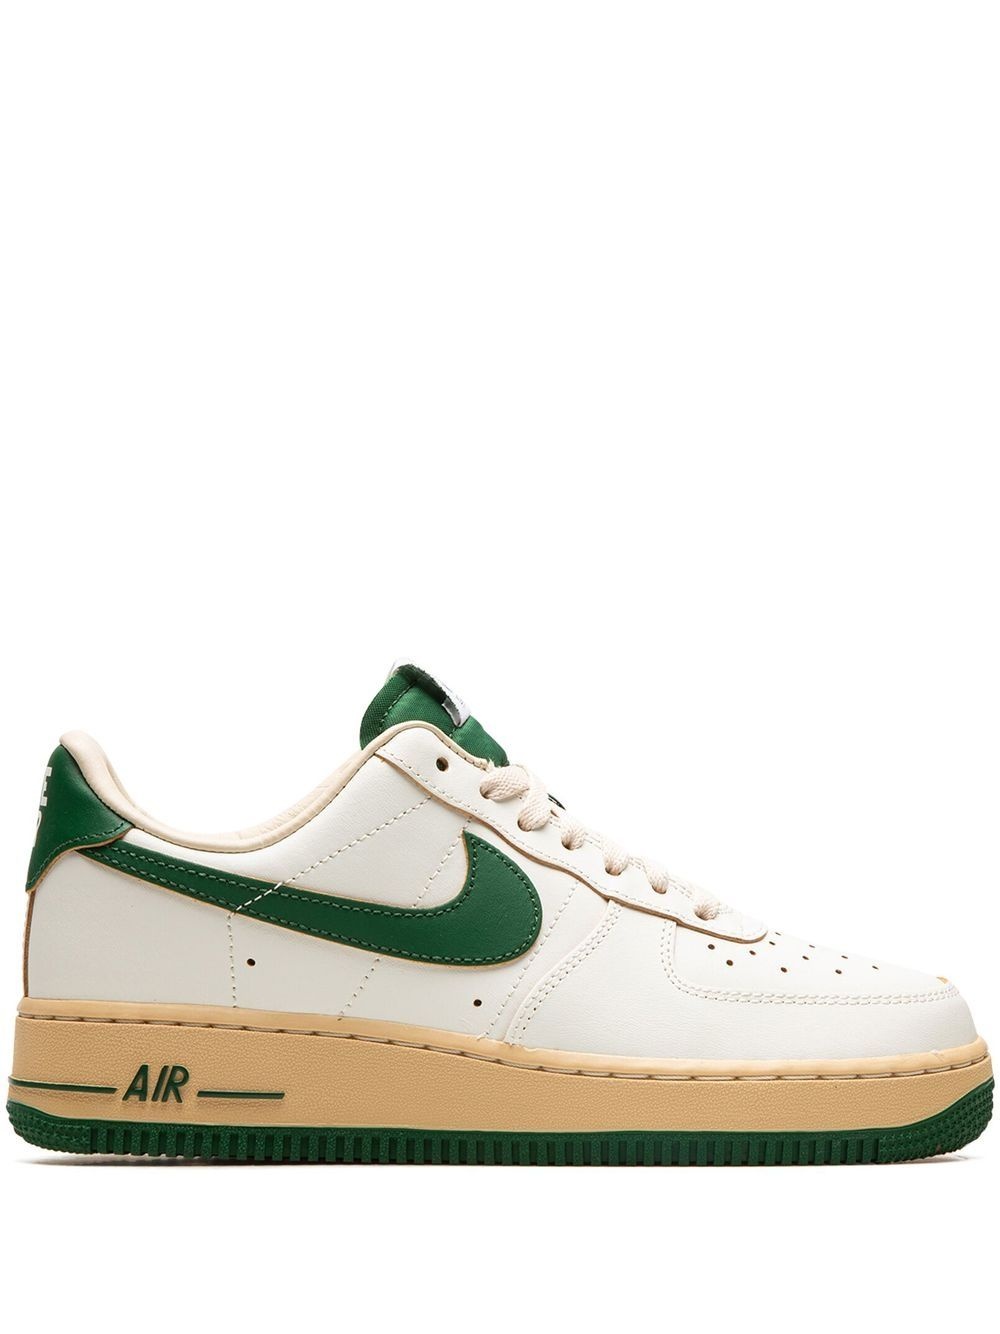 Air Force 1 Low "Gorge Green" sneakers - 1